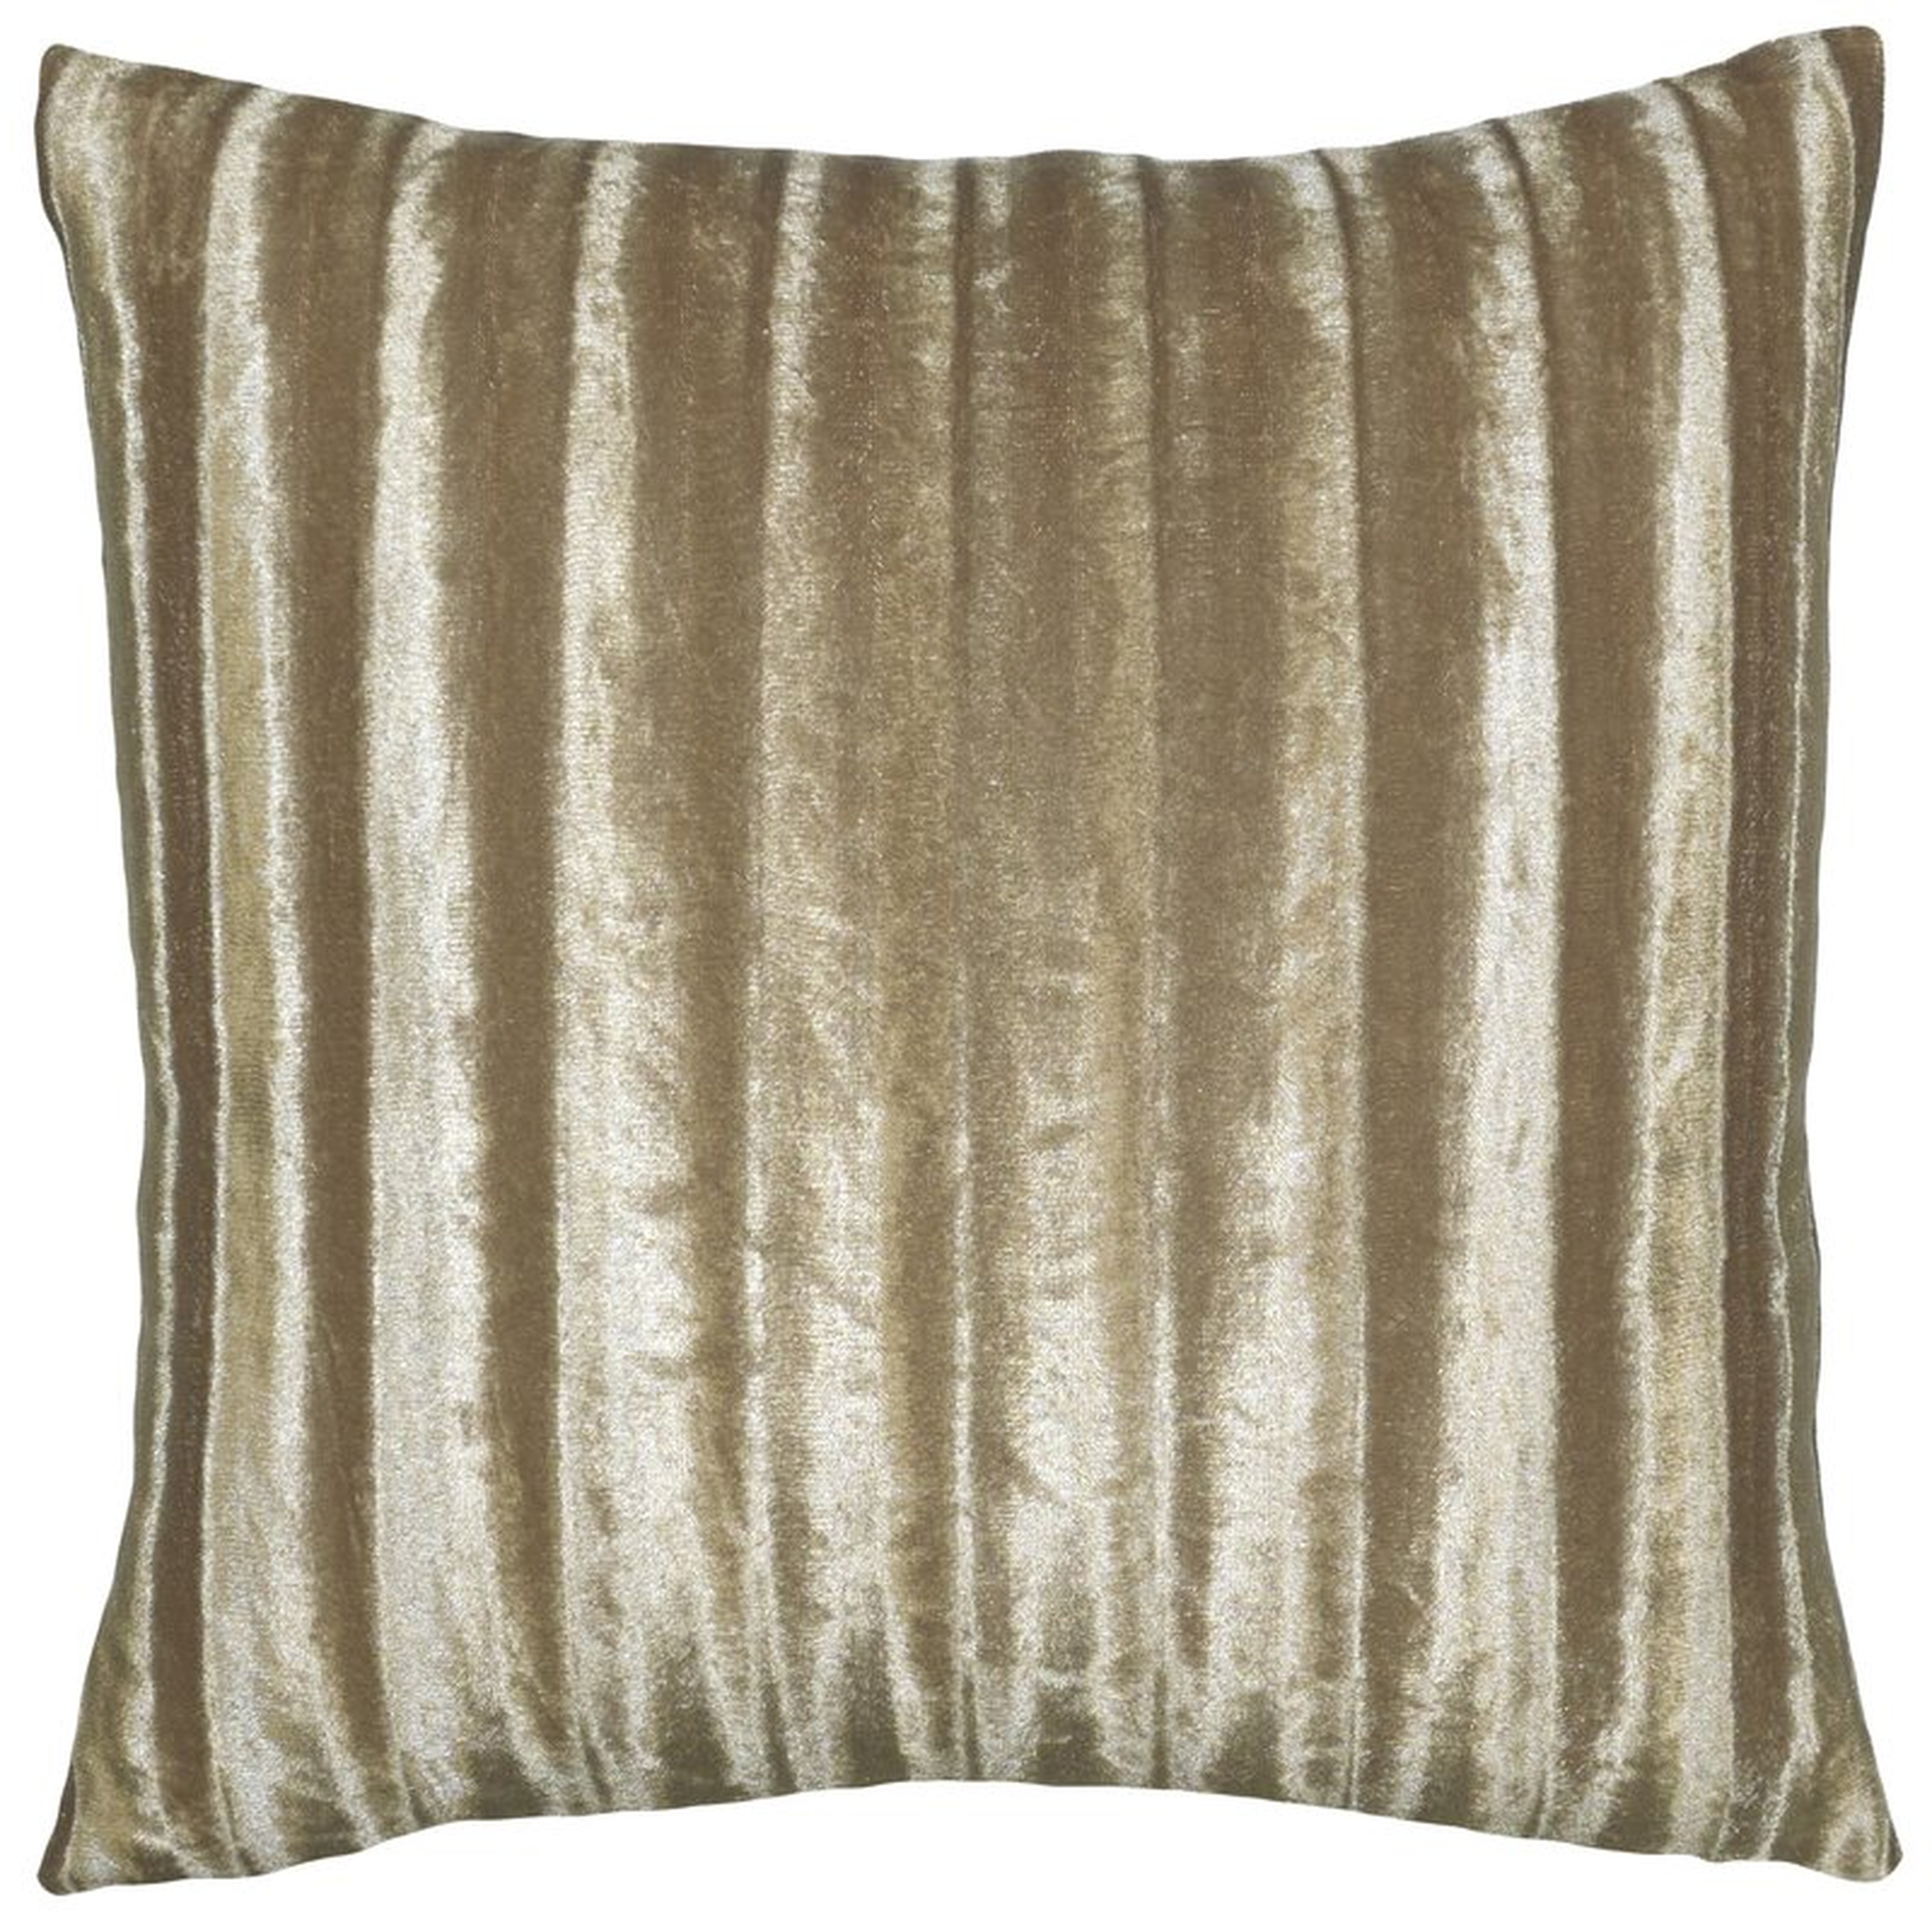 Square Feathers Striped Pillow Cover & Insert - Perigold